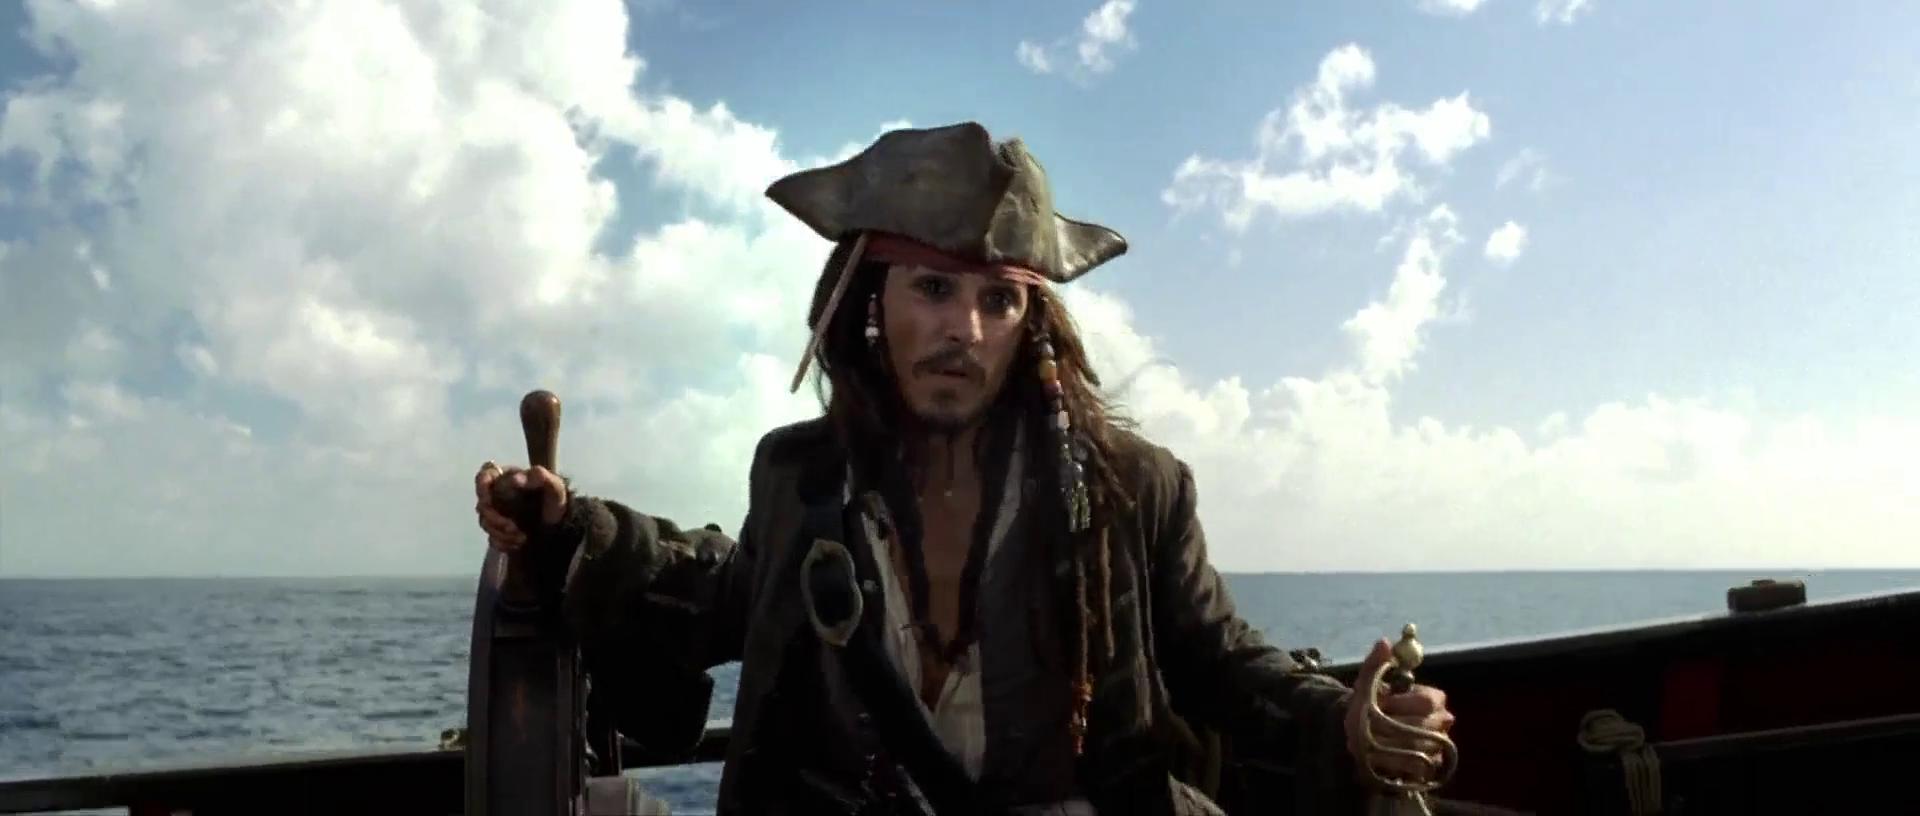 watch pirates of the caribbean 2 online free hd